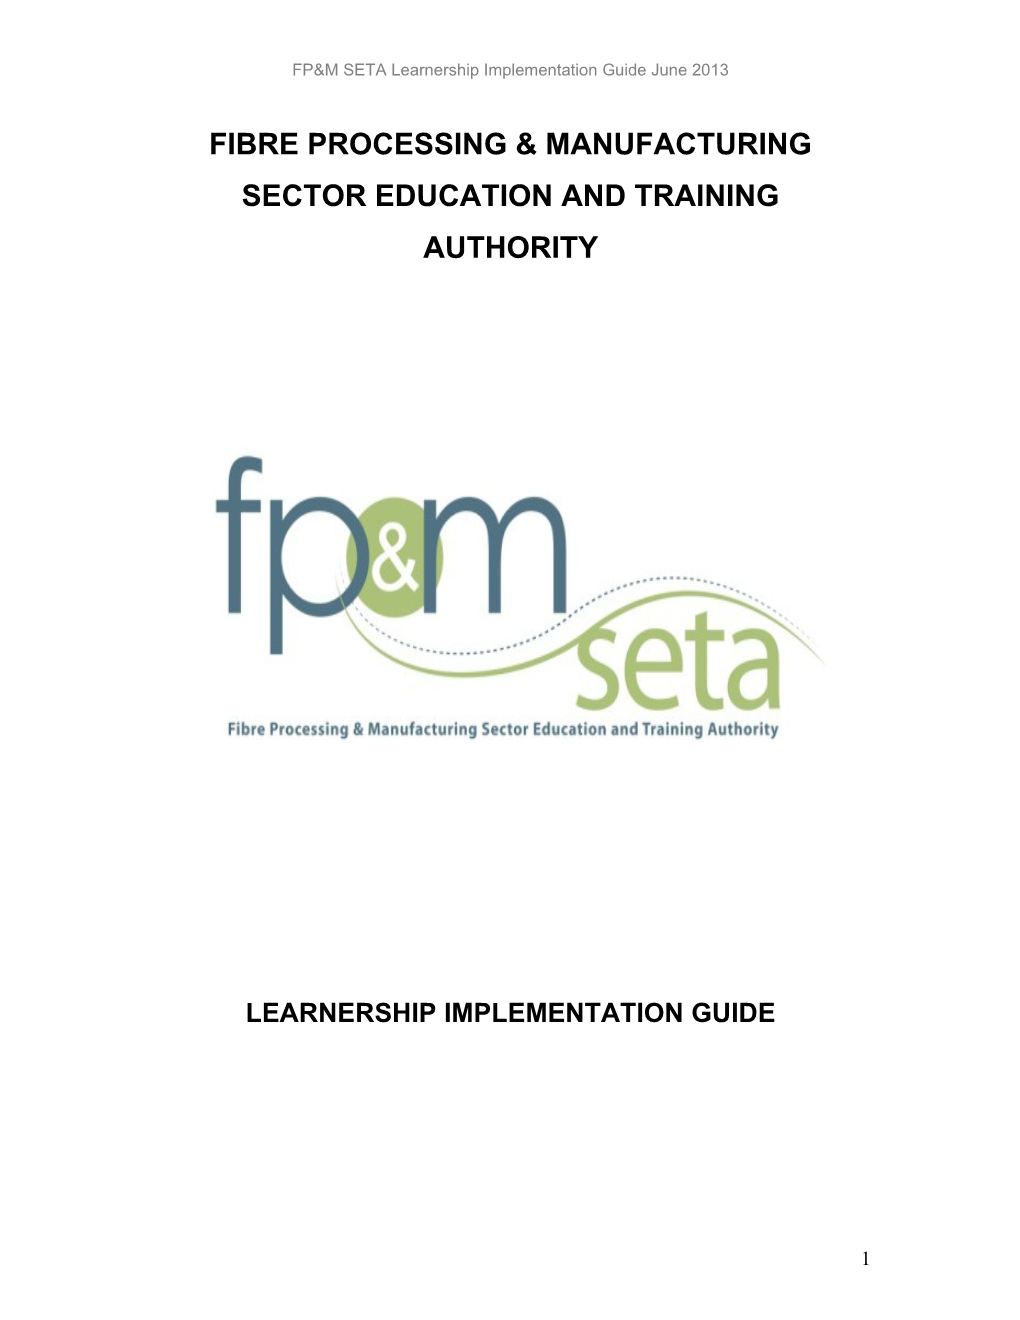 Guideline Document for Employers Embarking on Learnerships